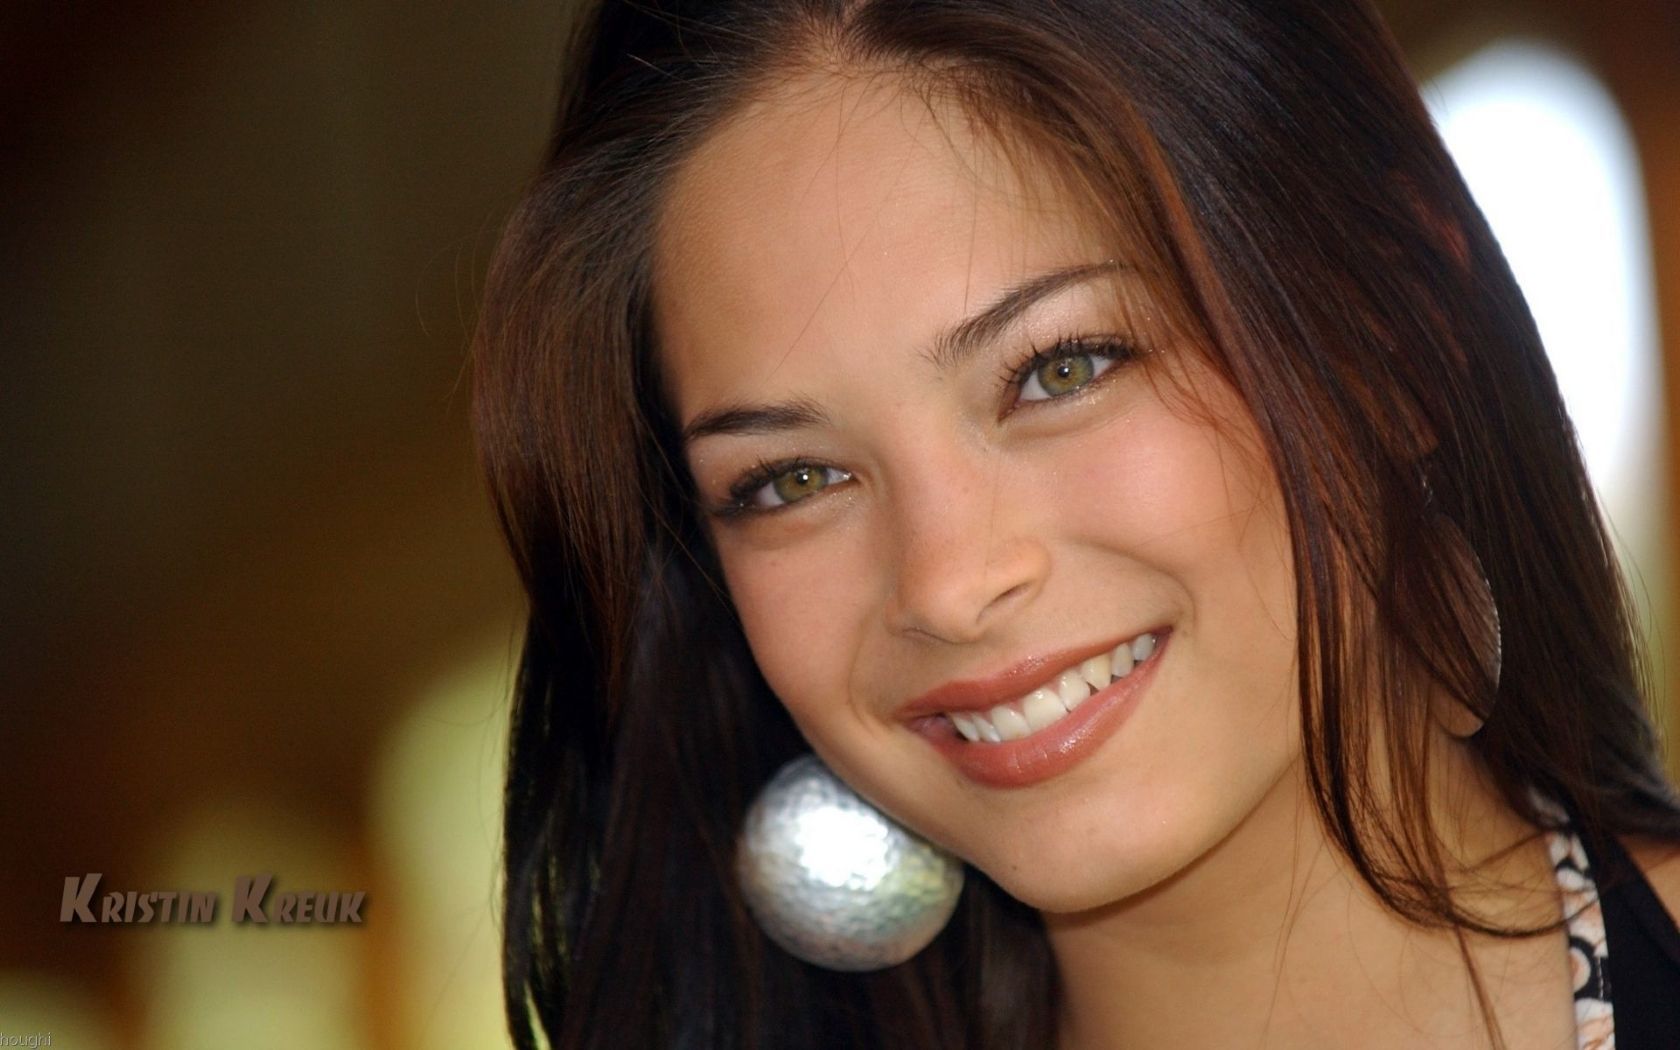 Amazing Kristin Kreuk Pictures & Backgrounds